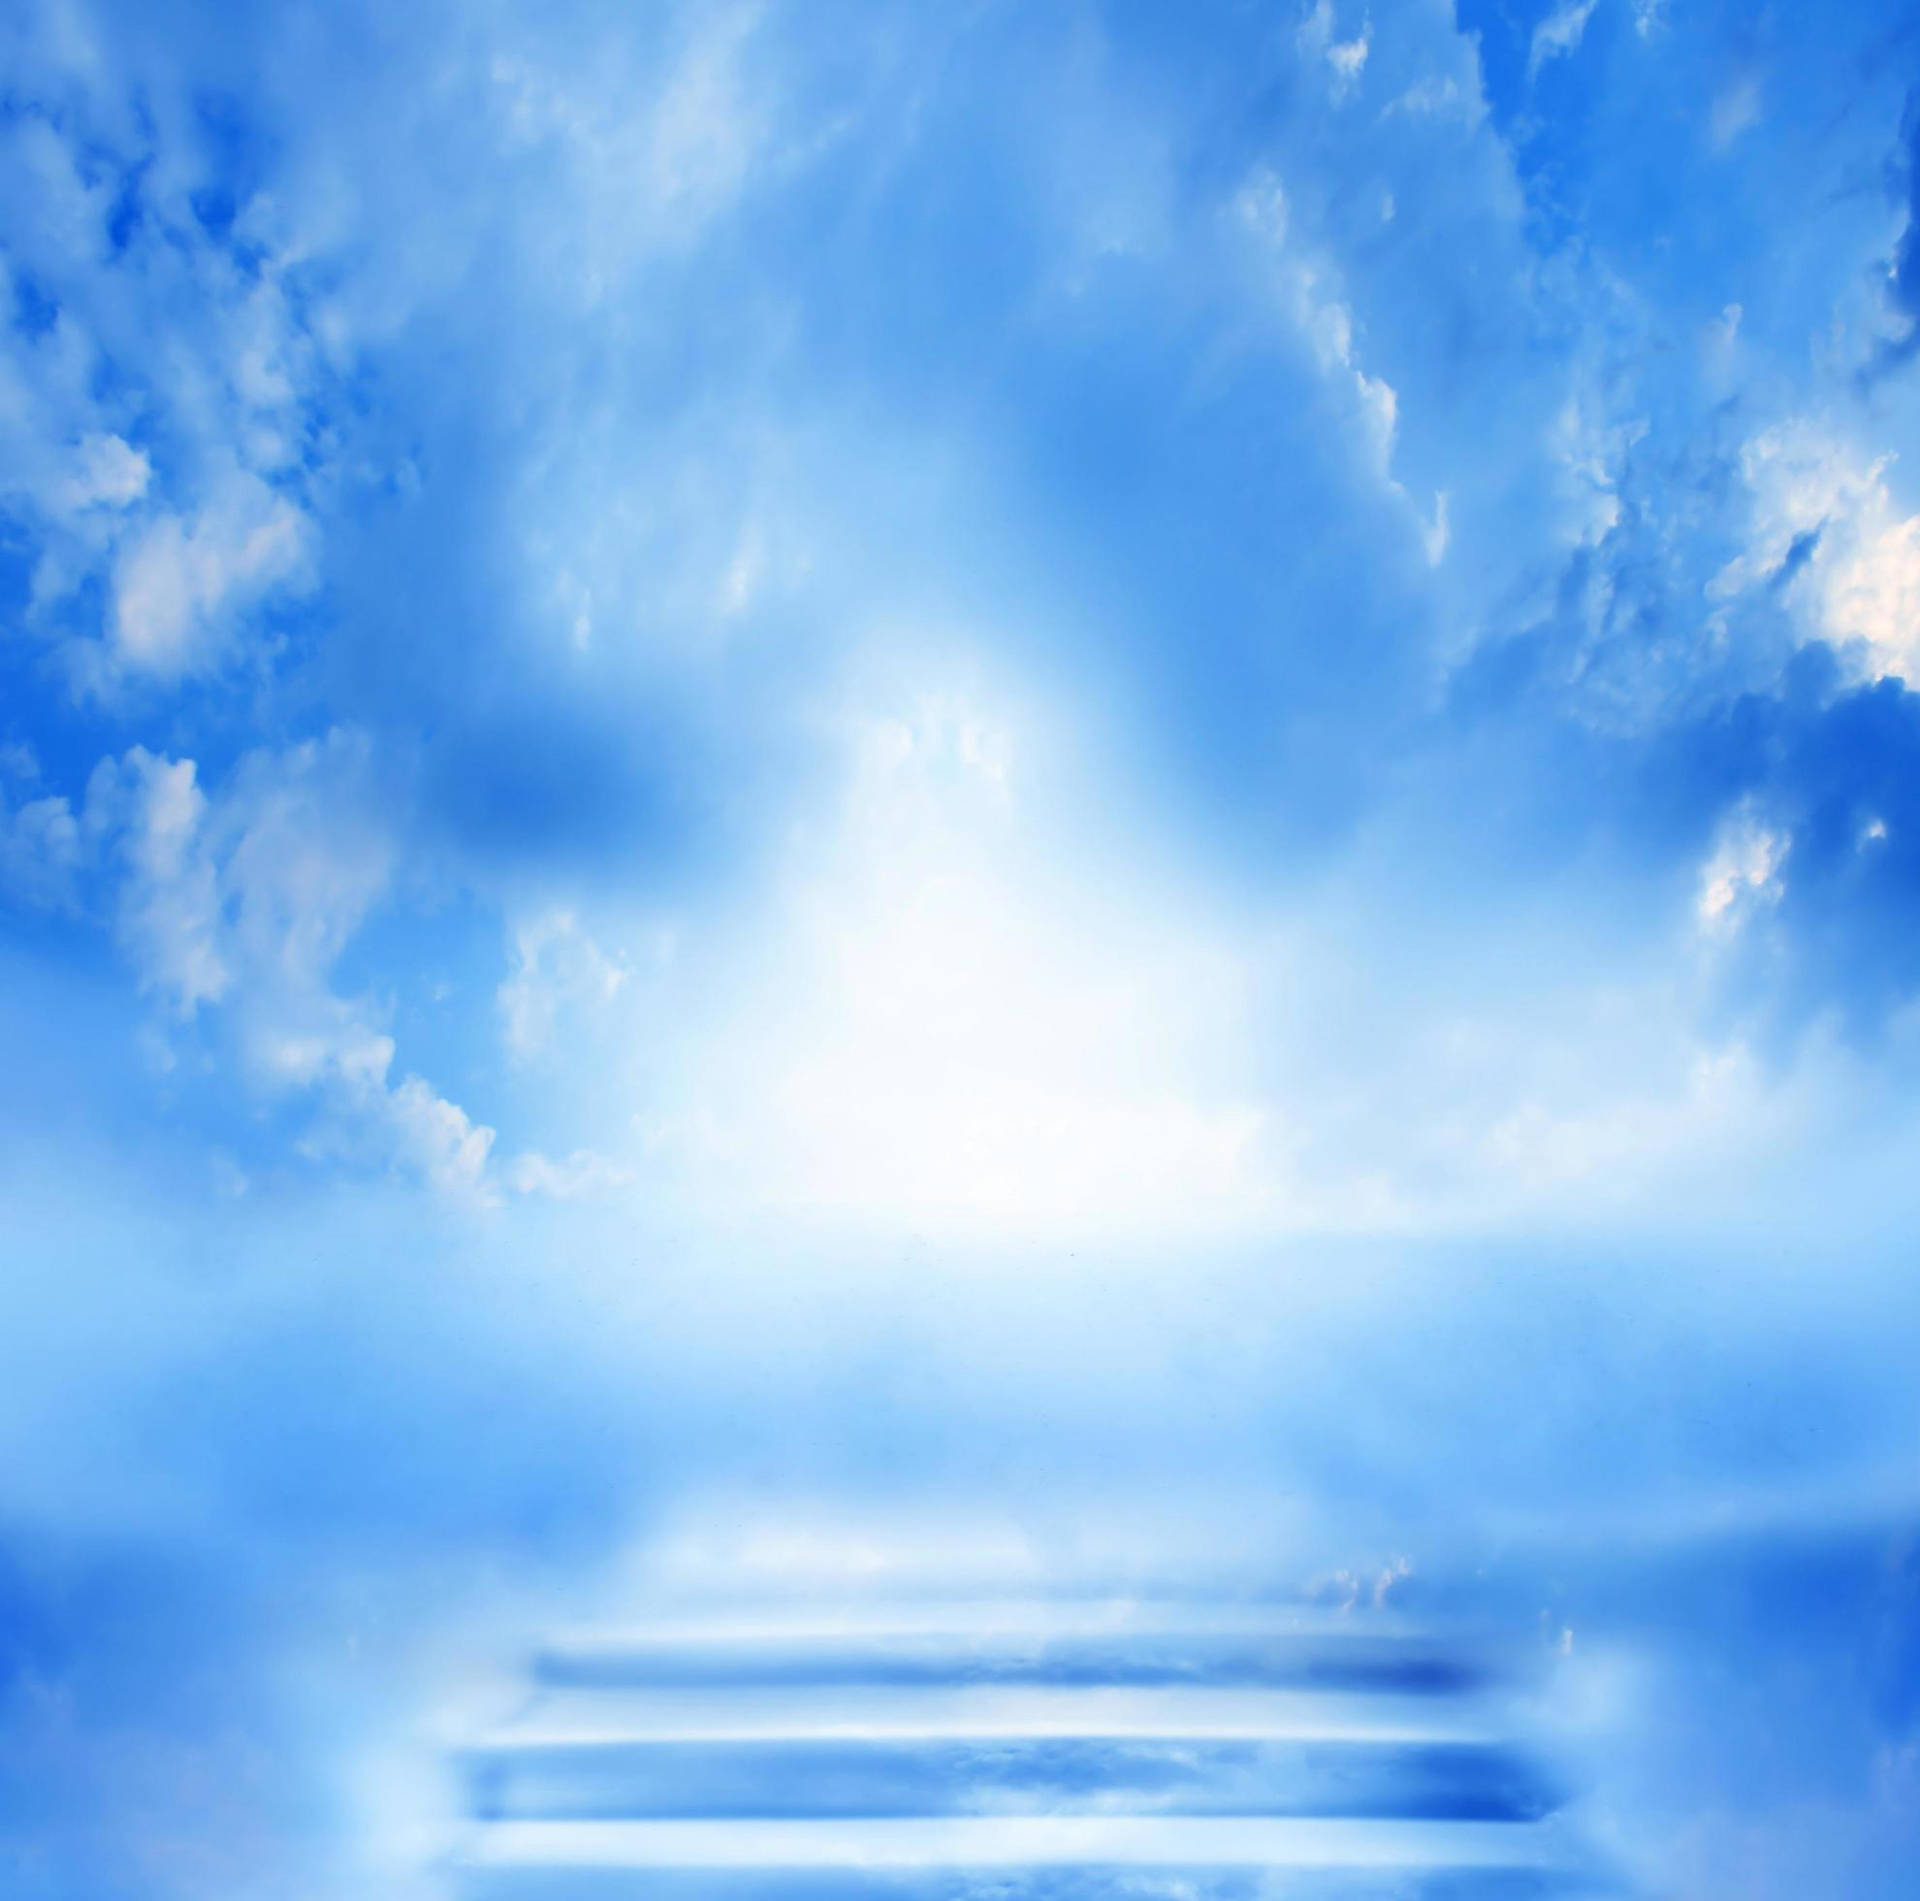 Funeral Clouds With Staircase Background